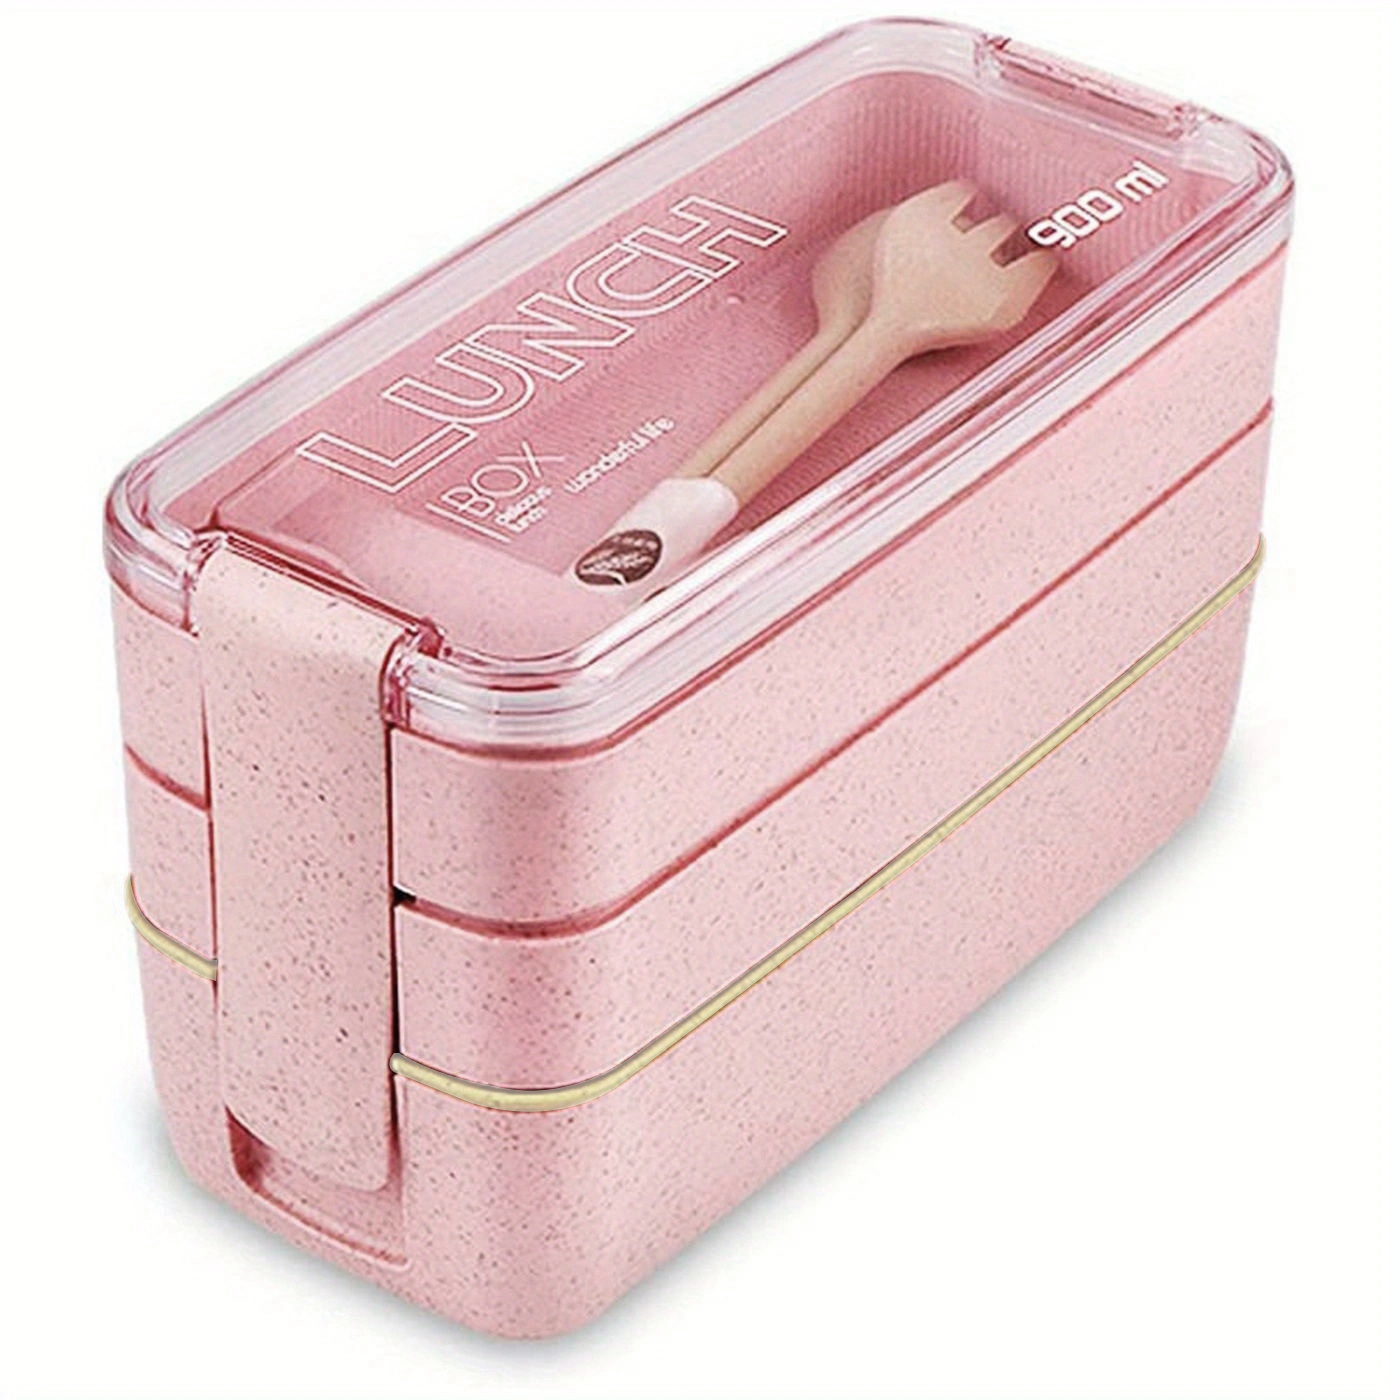 Bento Tek 3 oz White Buddha Box Snack / Sauce Container - with Pink Lid - 3  3/4 x 2 1/4 x 1 1/4 - 4 count box